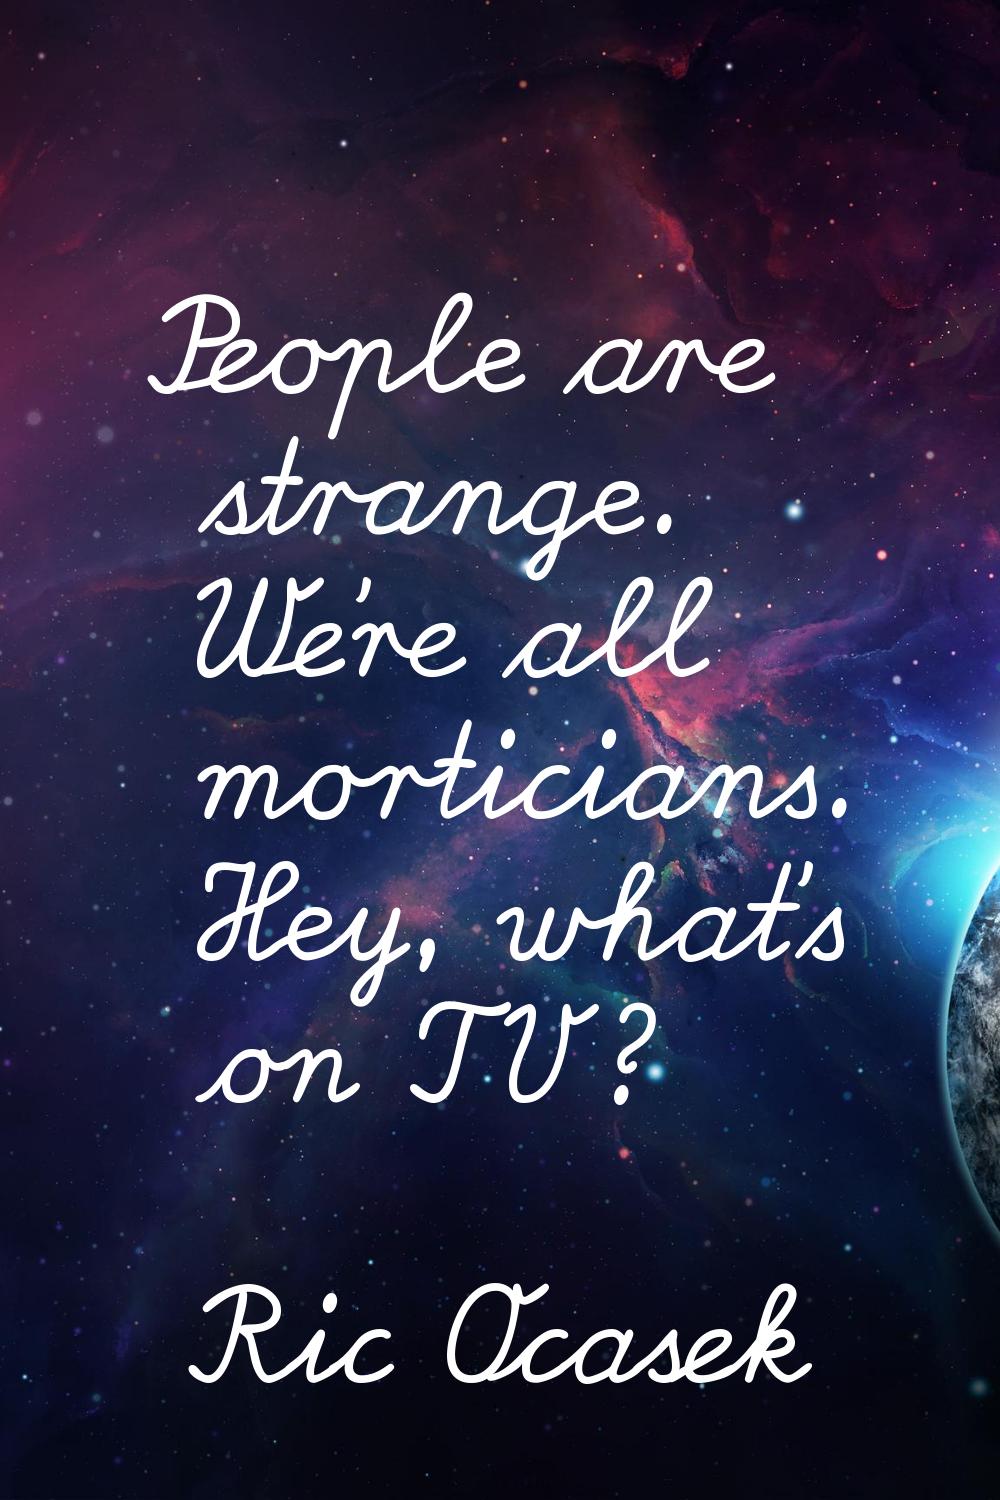 People are strange. We're all morticians. Hey, what's on TV?